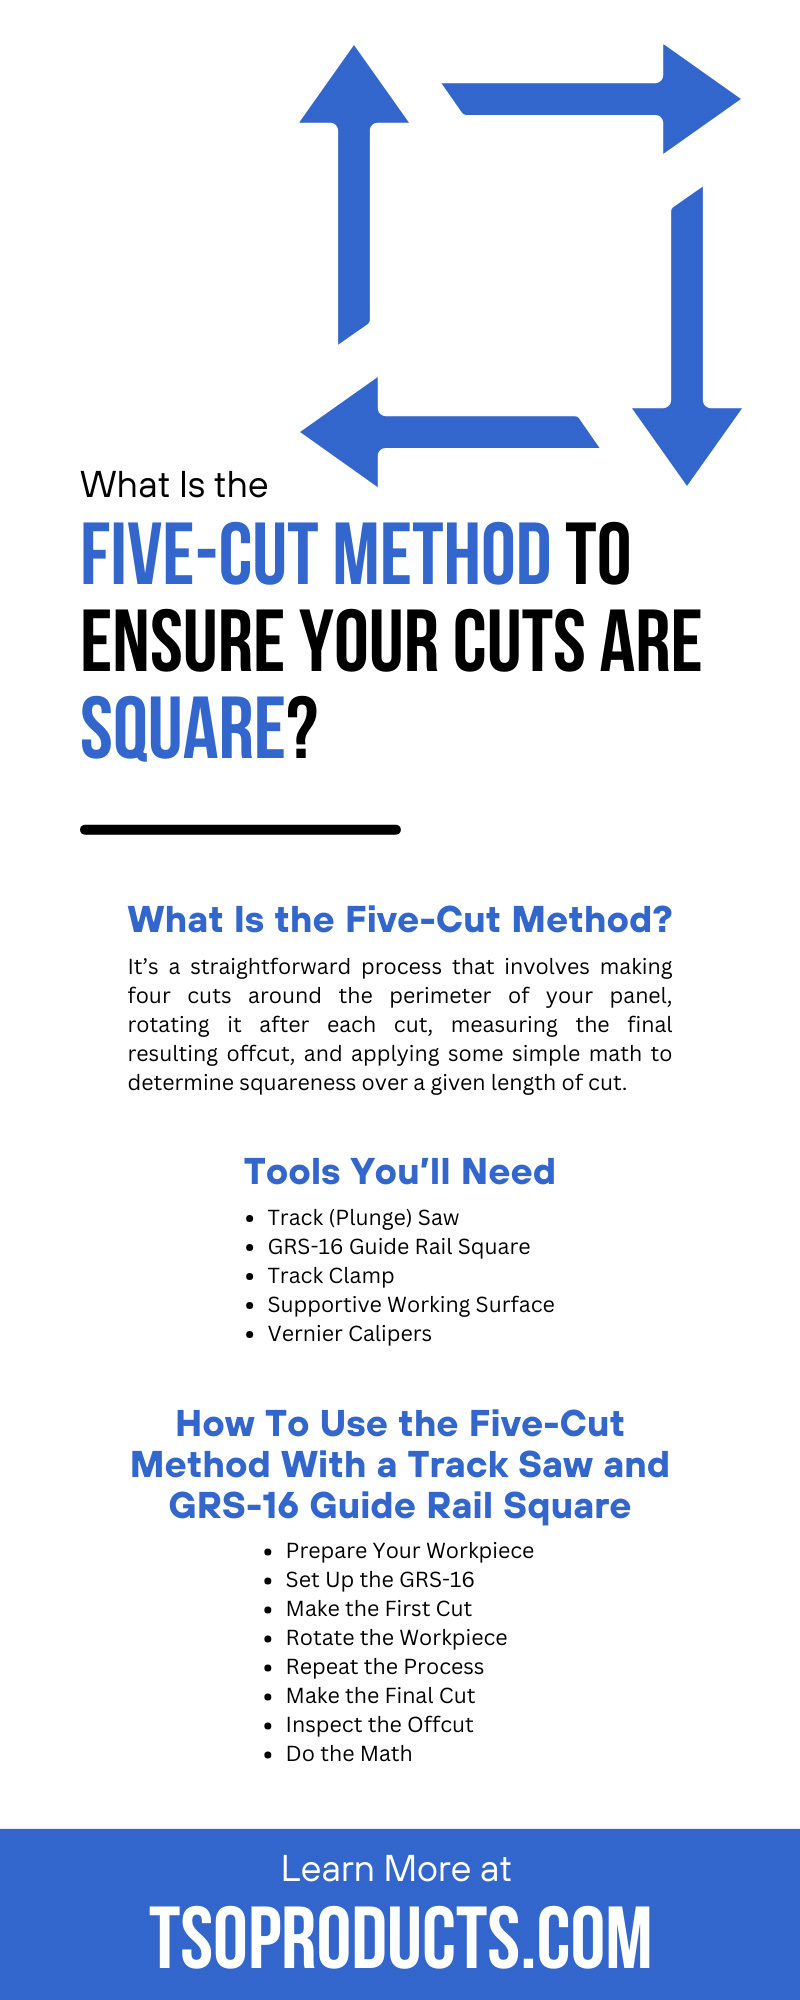 What Is the Five-Cut Method To Ensure Your Cuts Are Square?